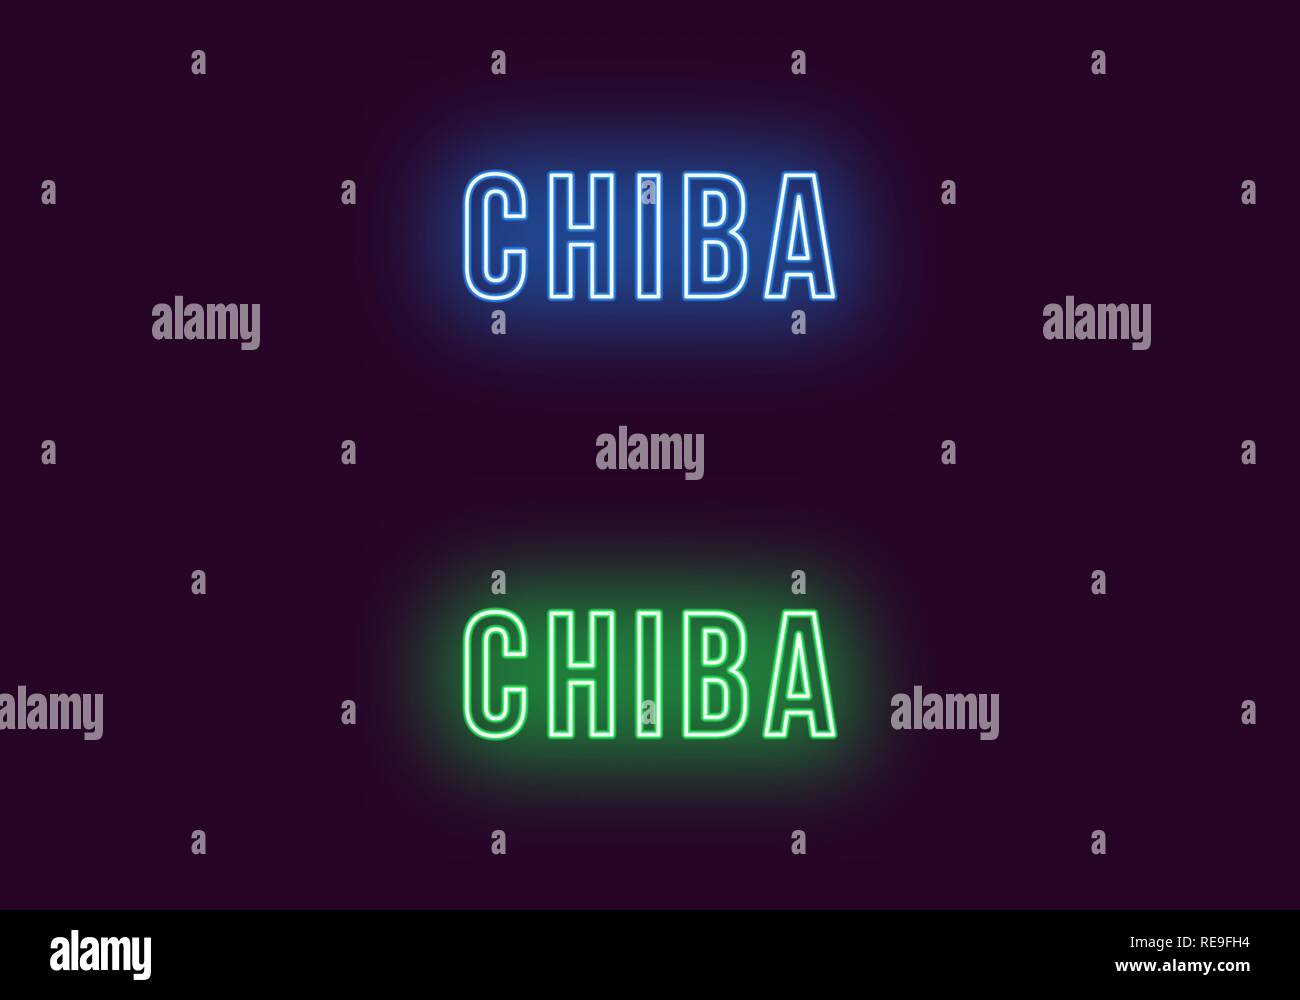 Neon name of Chiba city in Japan. Vector text of Chiba, Neon inscription with backlight in Bold style, blue and green colors. Isolated glowing title f Stock Vector